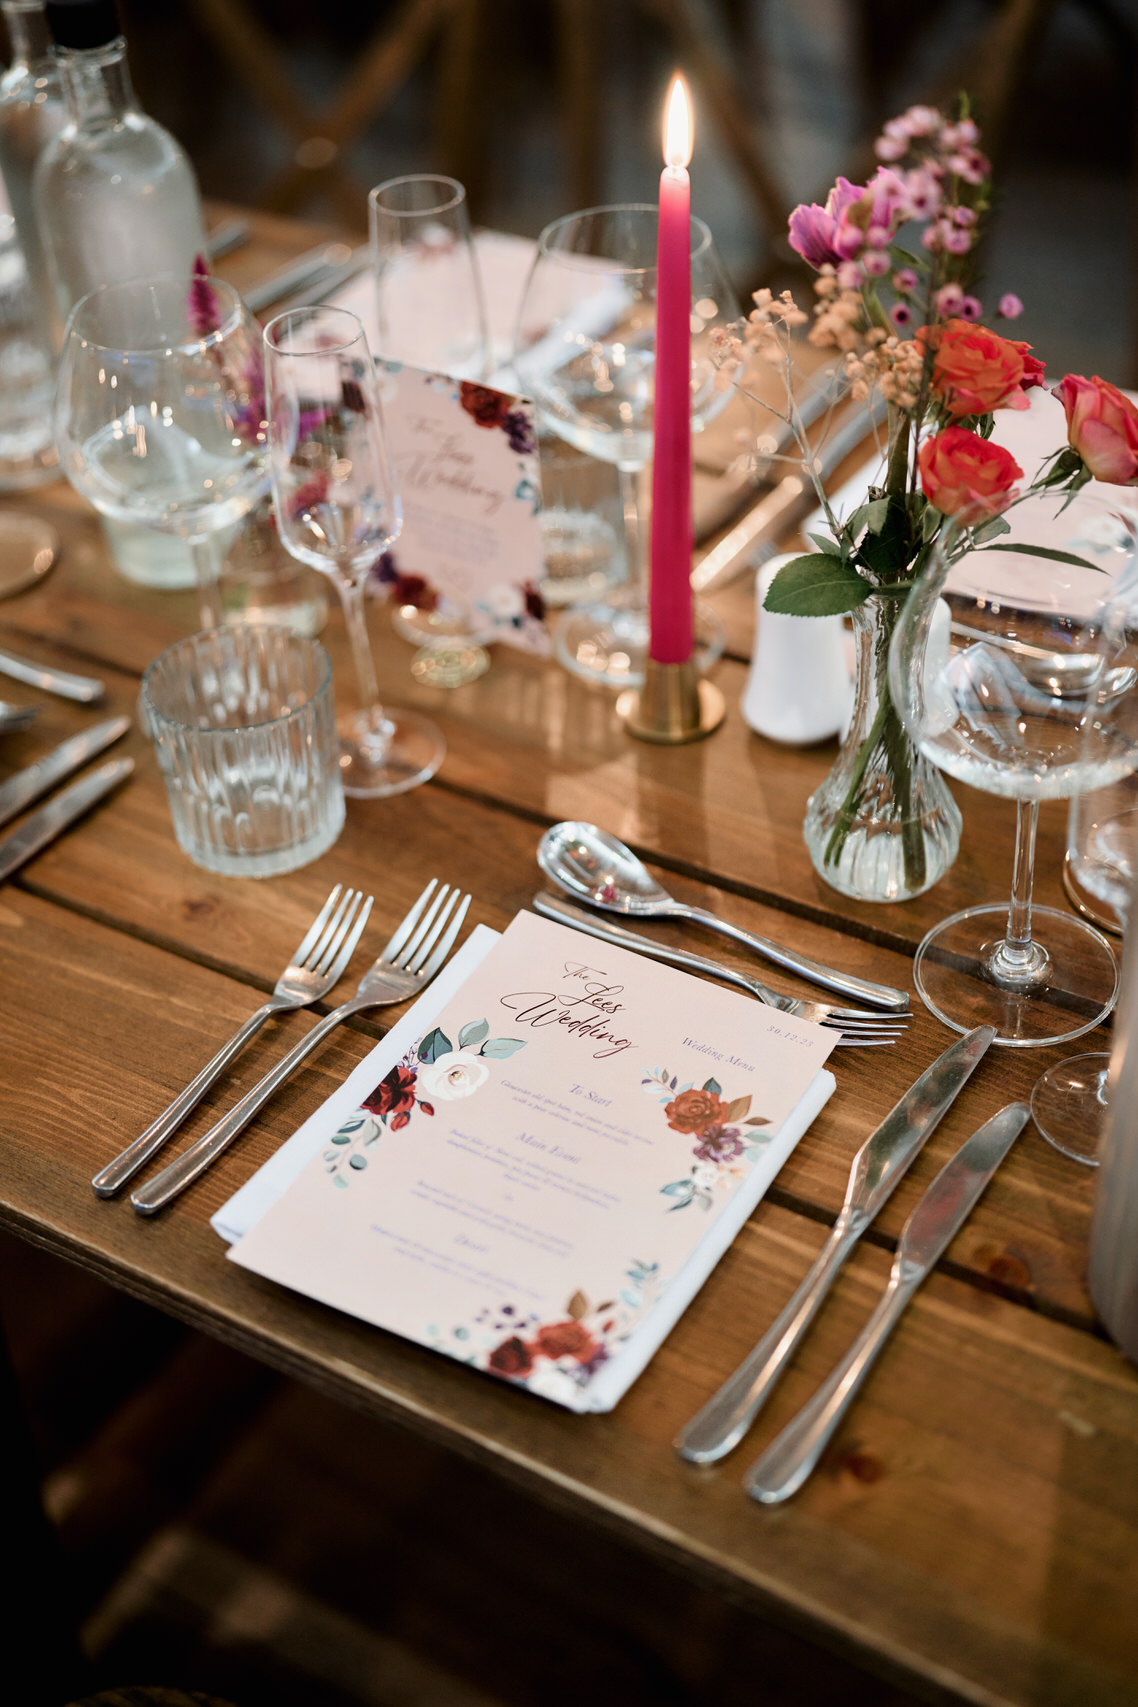 A dinner table set up with flowers and cutlery on a wooden table.